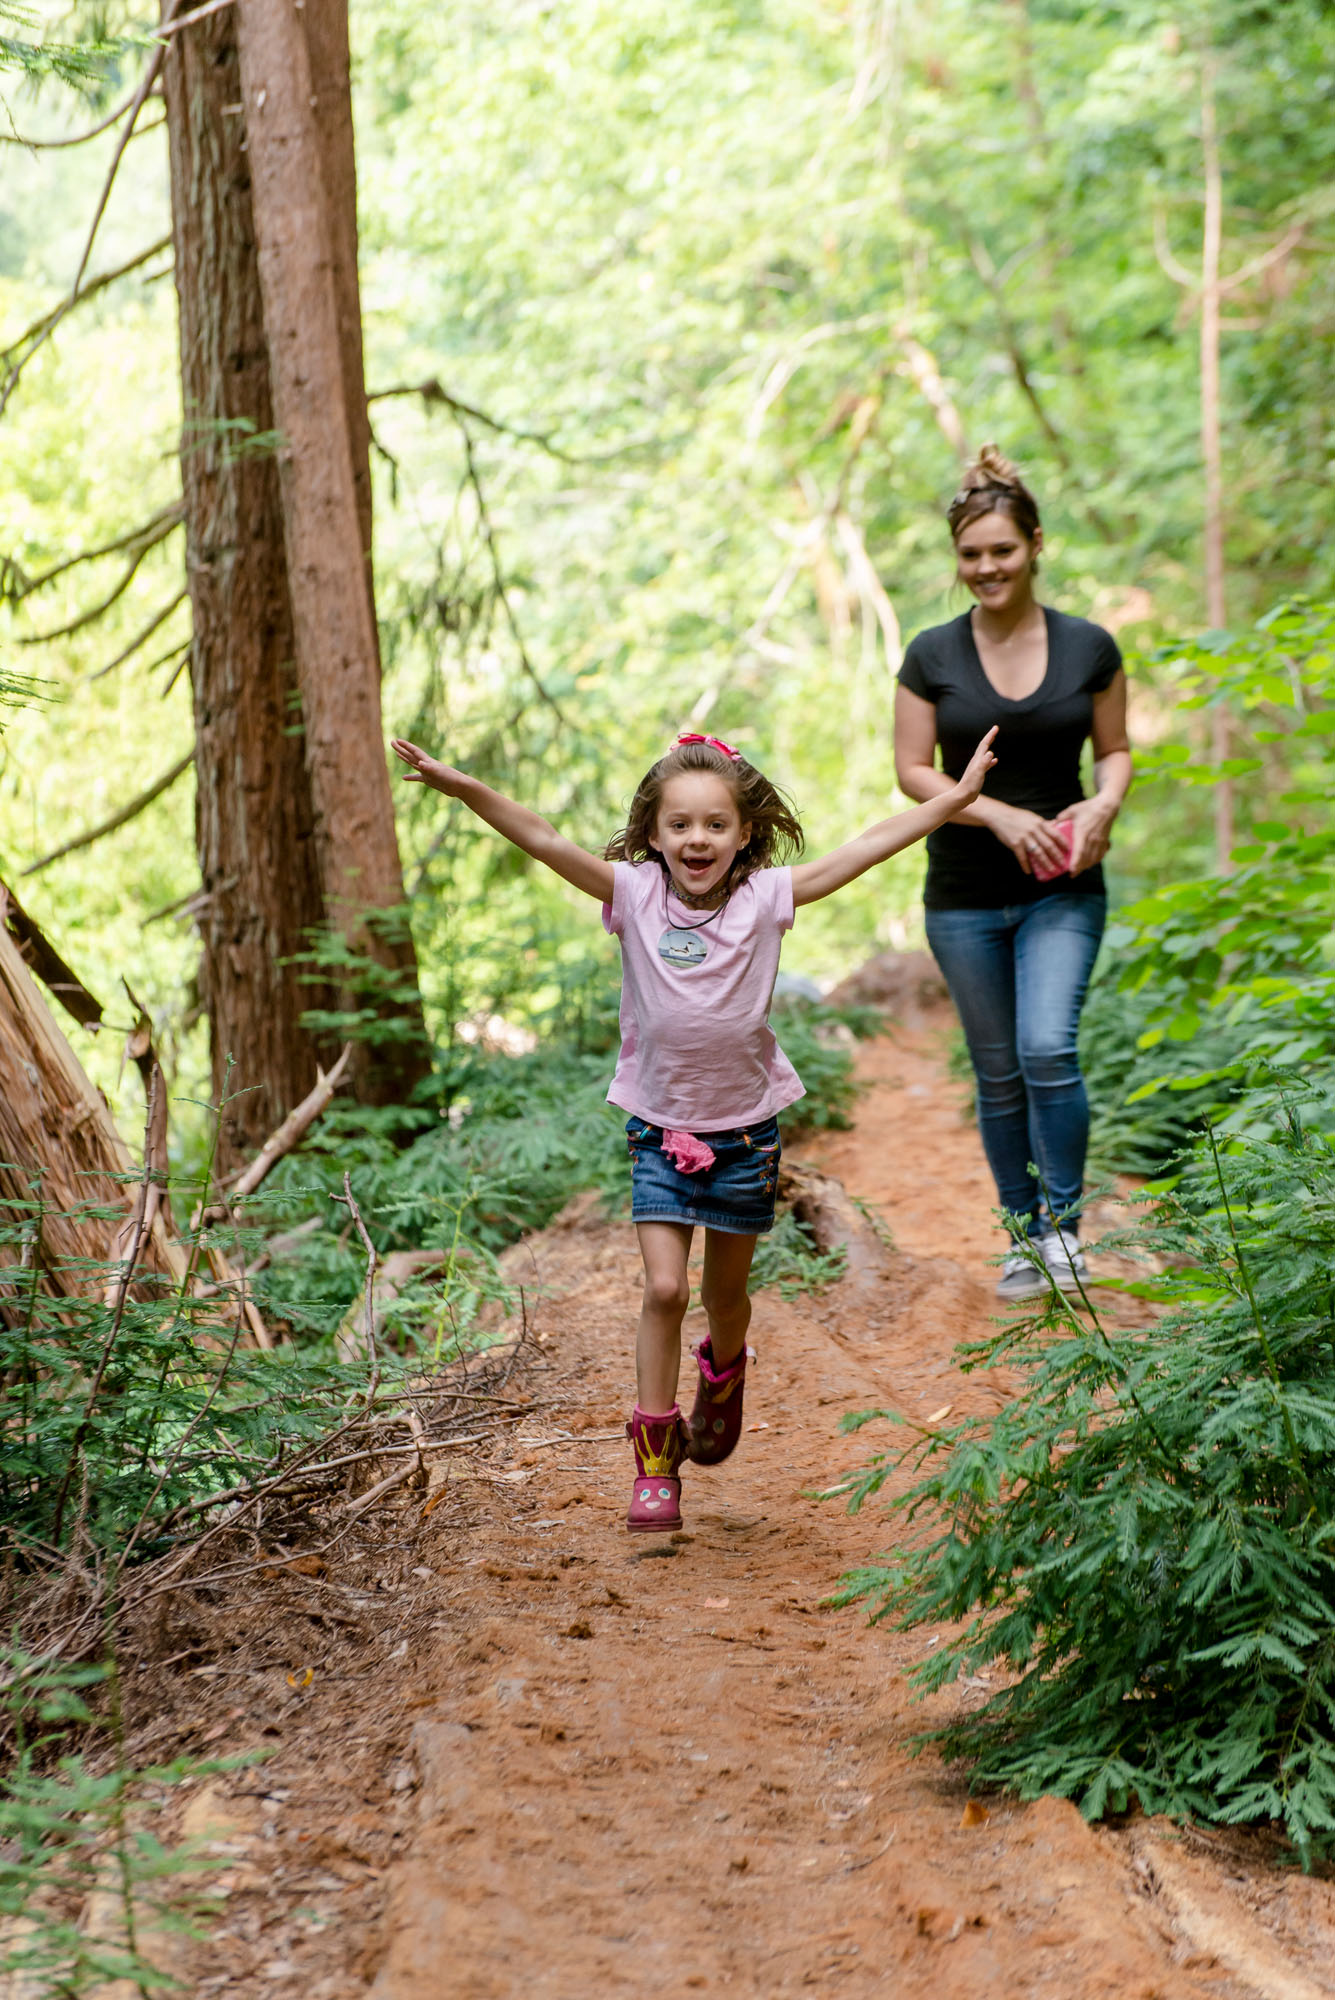 A mother and daughter hike along a dirt trail in a sun-filled forest